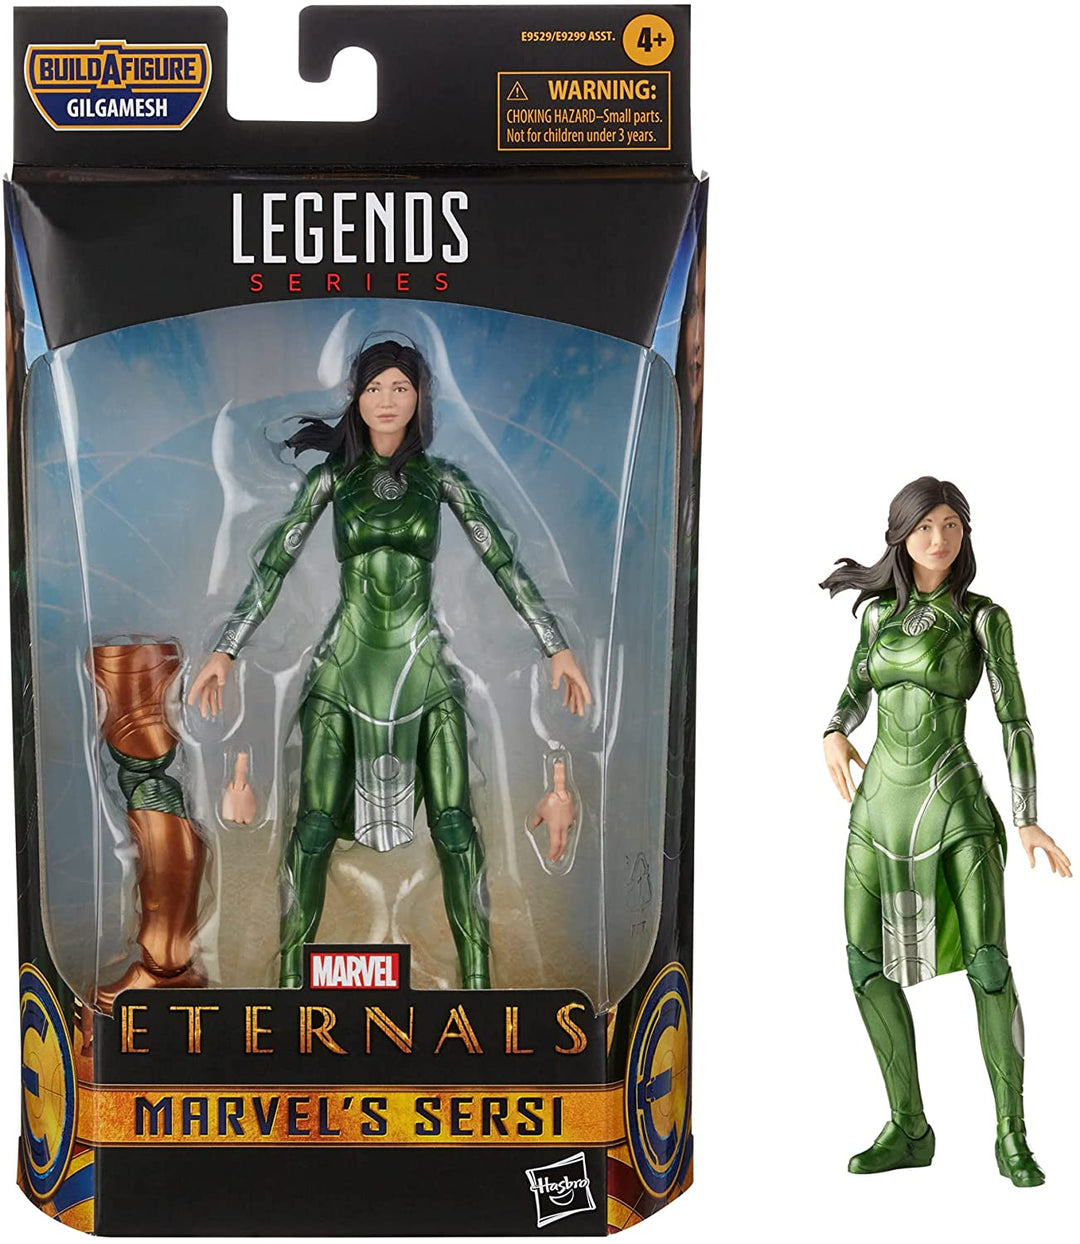 Hasbro Marvel Legends Series The Eternals 15-cm Action Figure Toy Marvel’s Sersi, Includes 2 Accessories, Ages 4 and Up